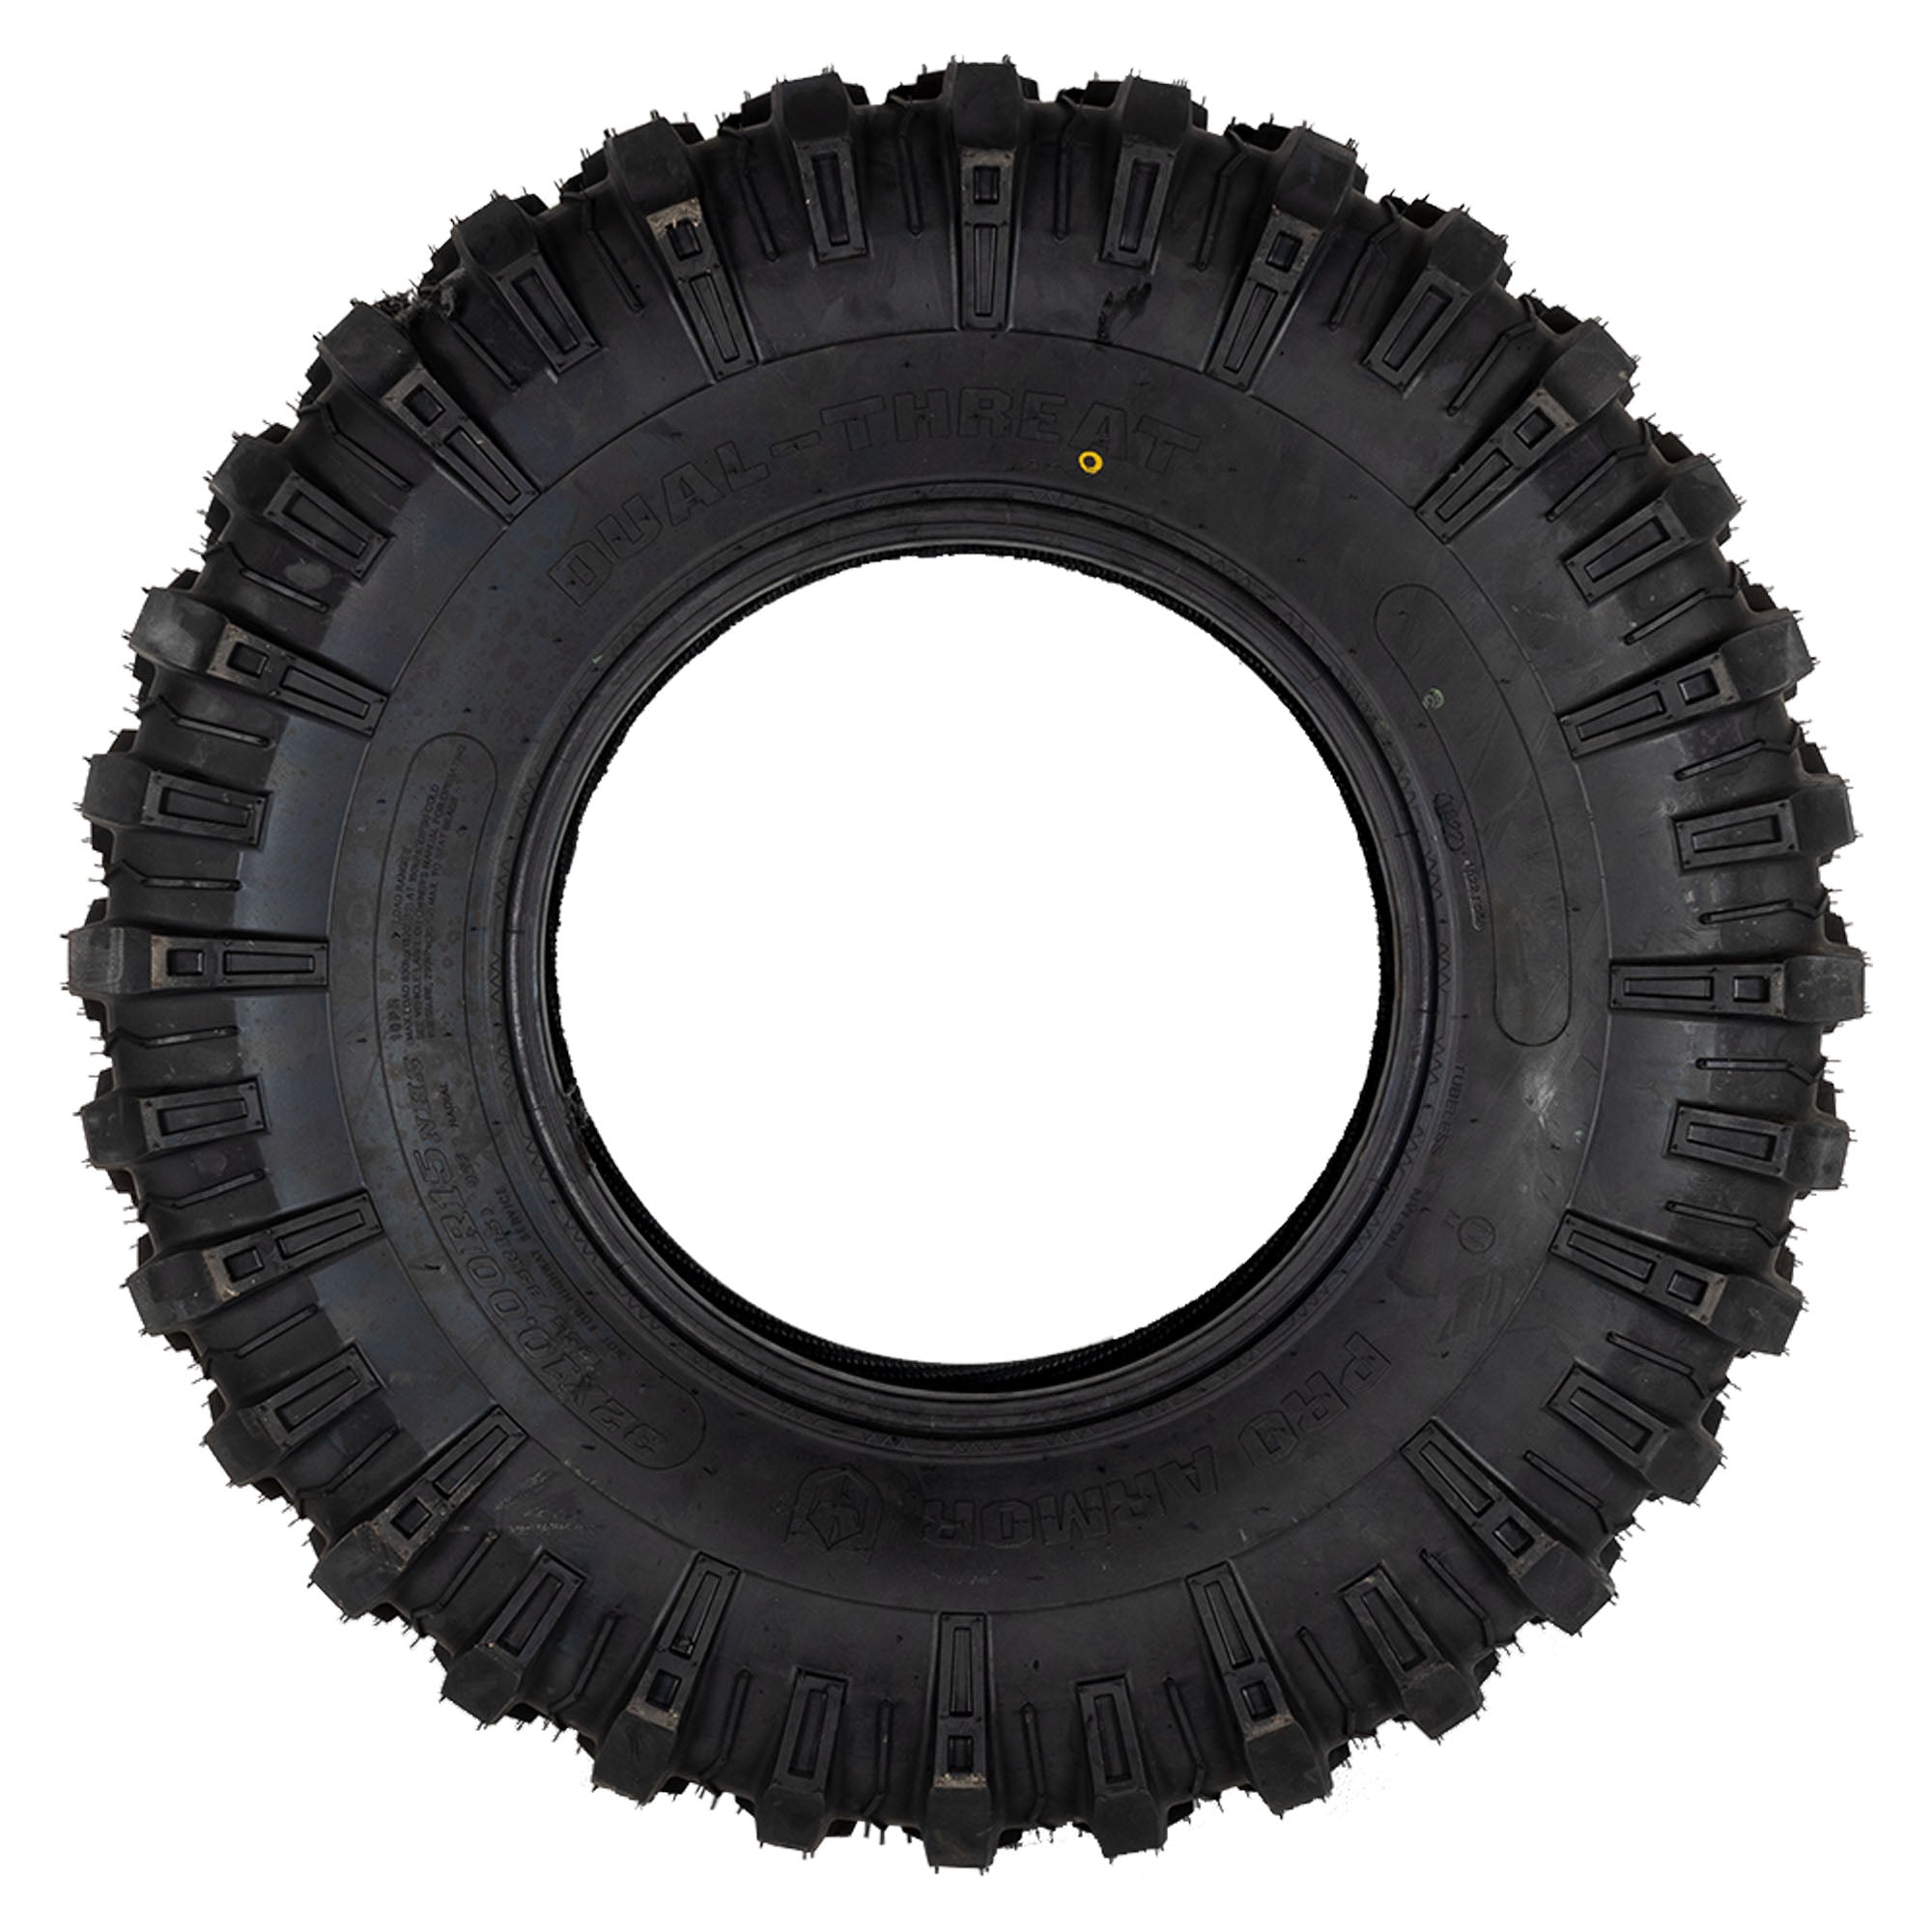 Pro Armor 5416753 Front / Rear Tire